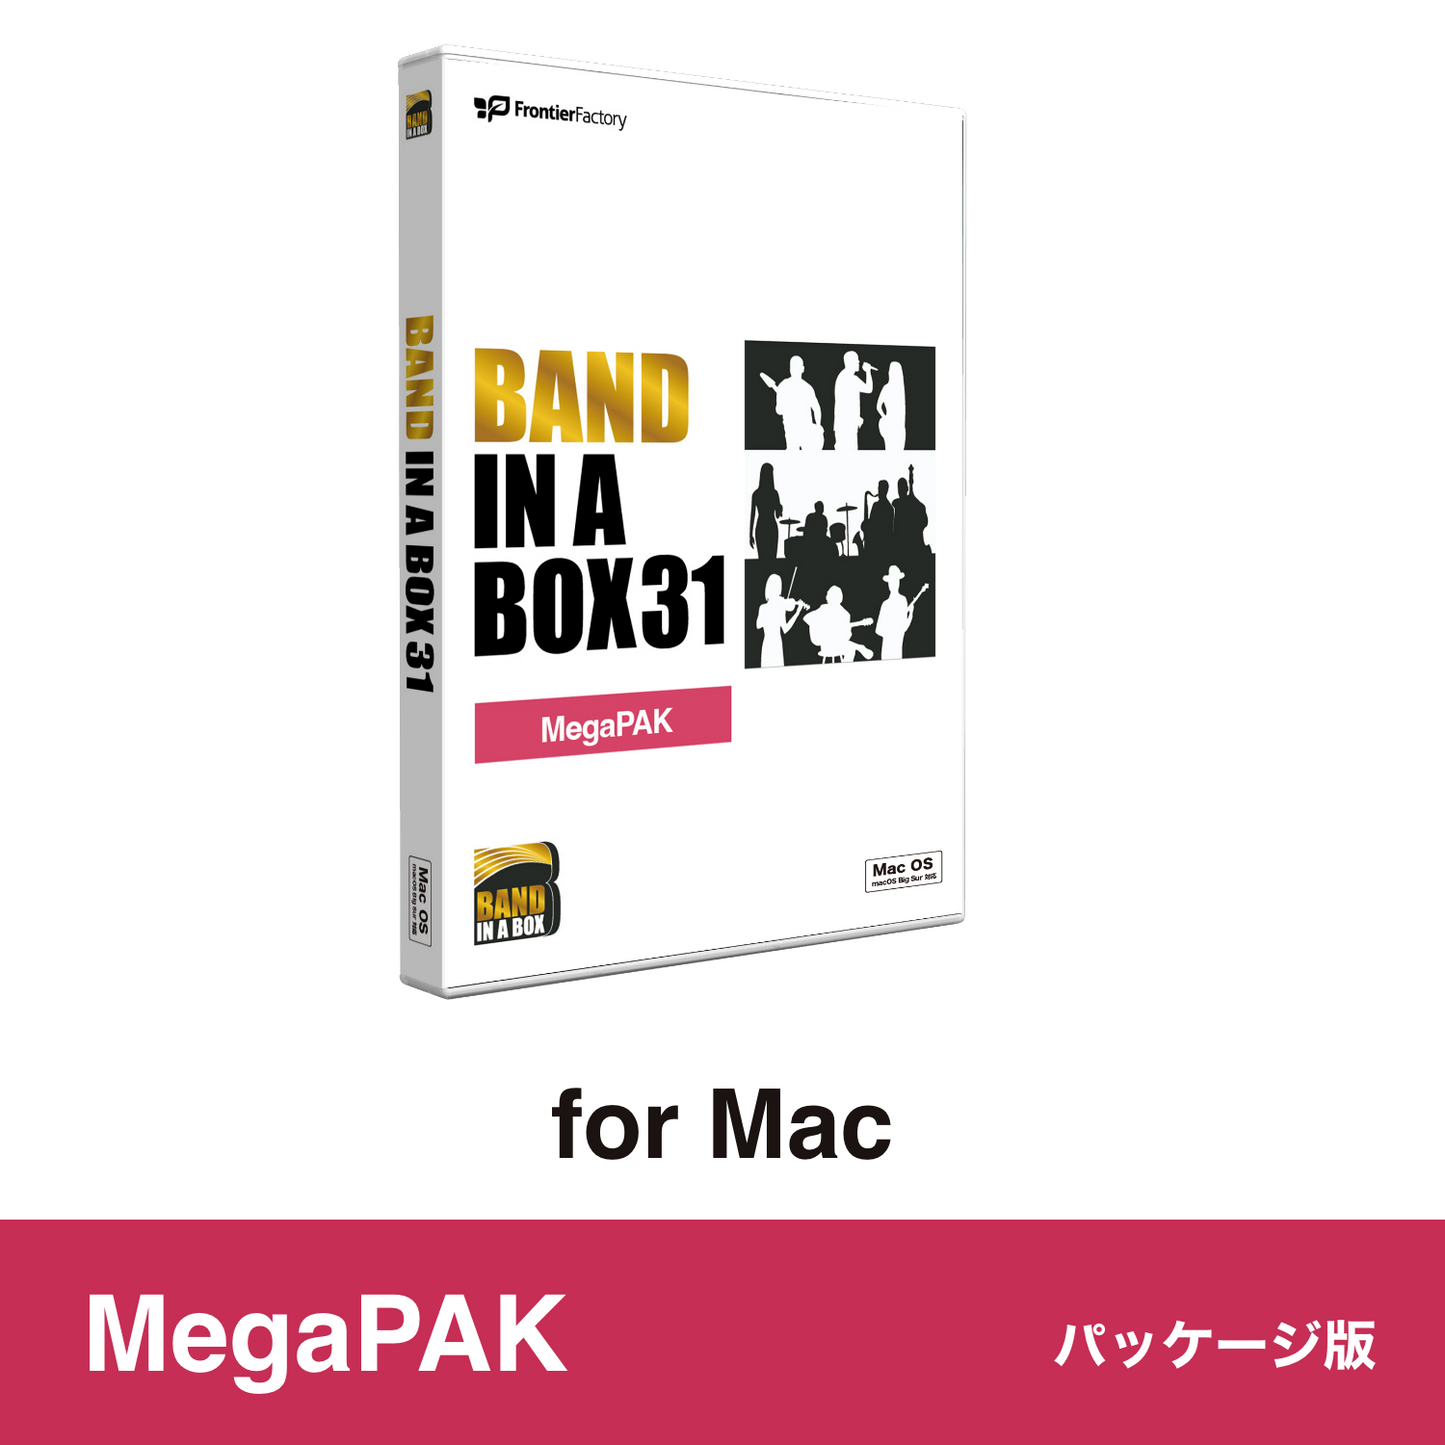 Band-in-a-Box 31 for Mac【パッケージ版】